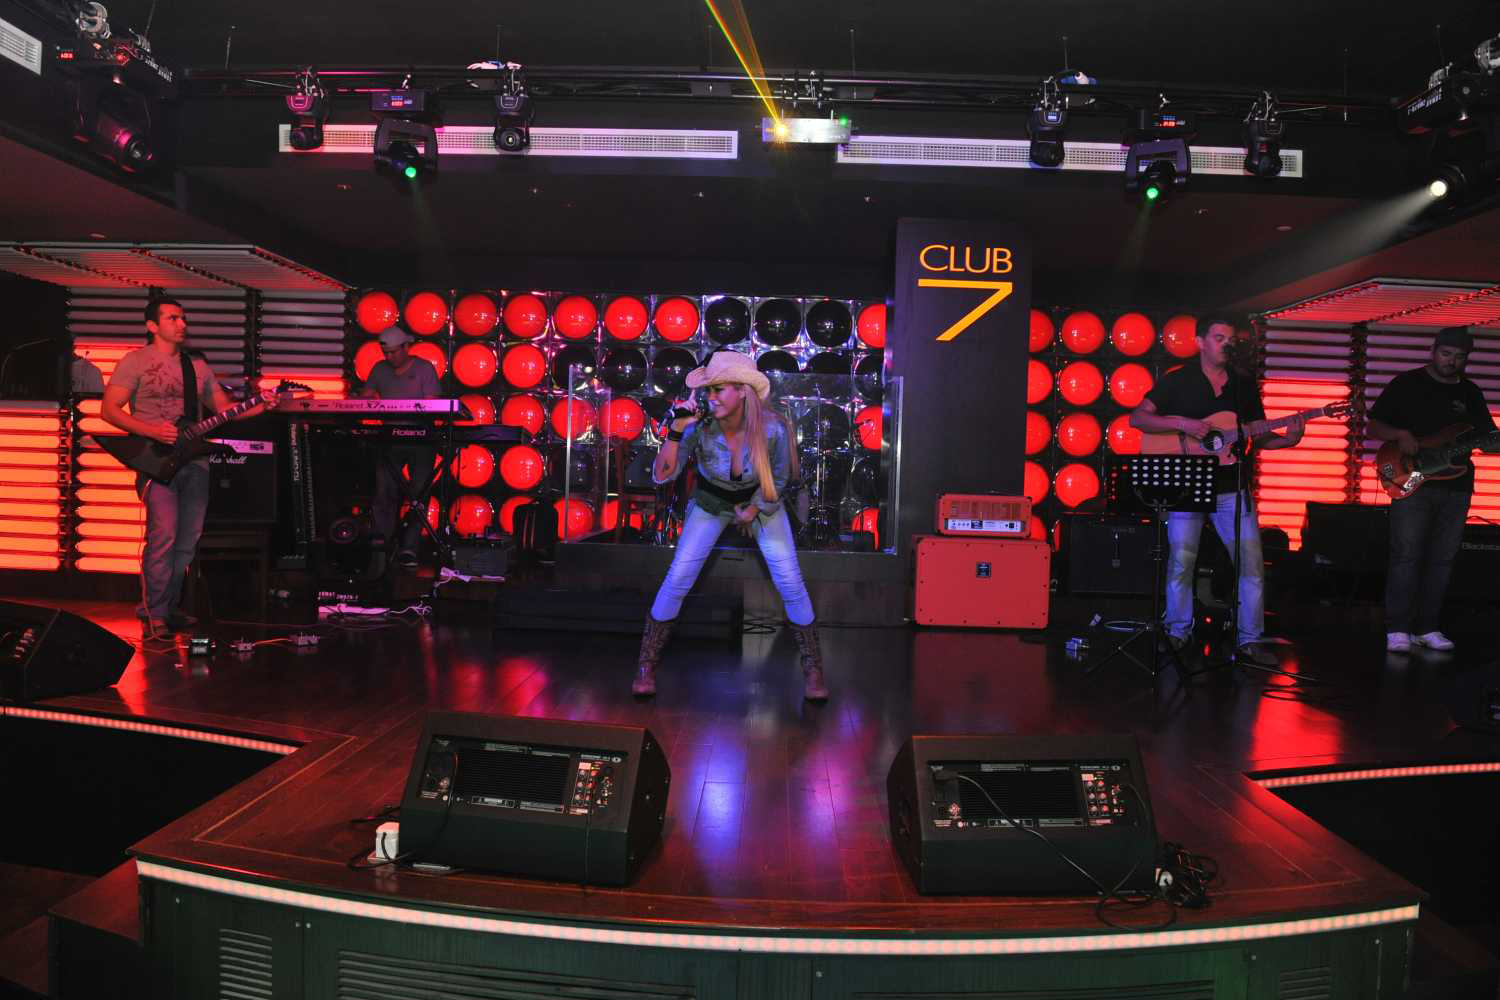 Club Se7even: Night Clubs in Dubai without Entry Charges